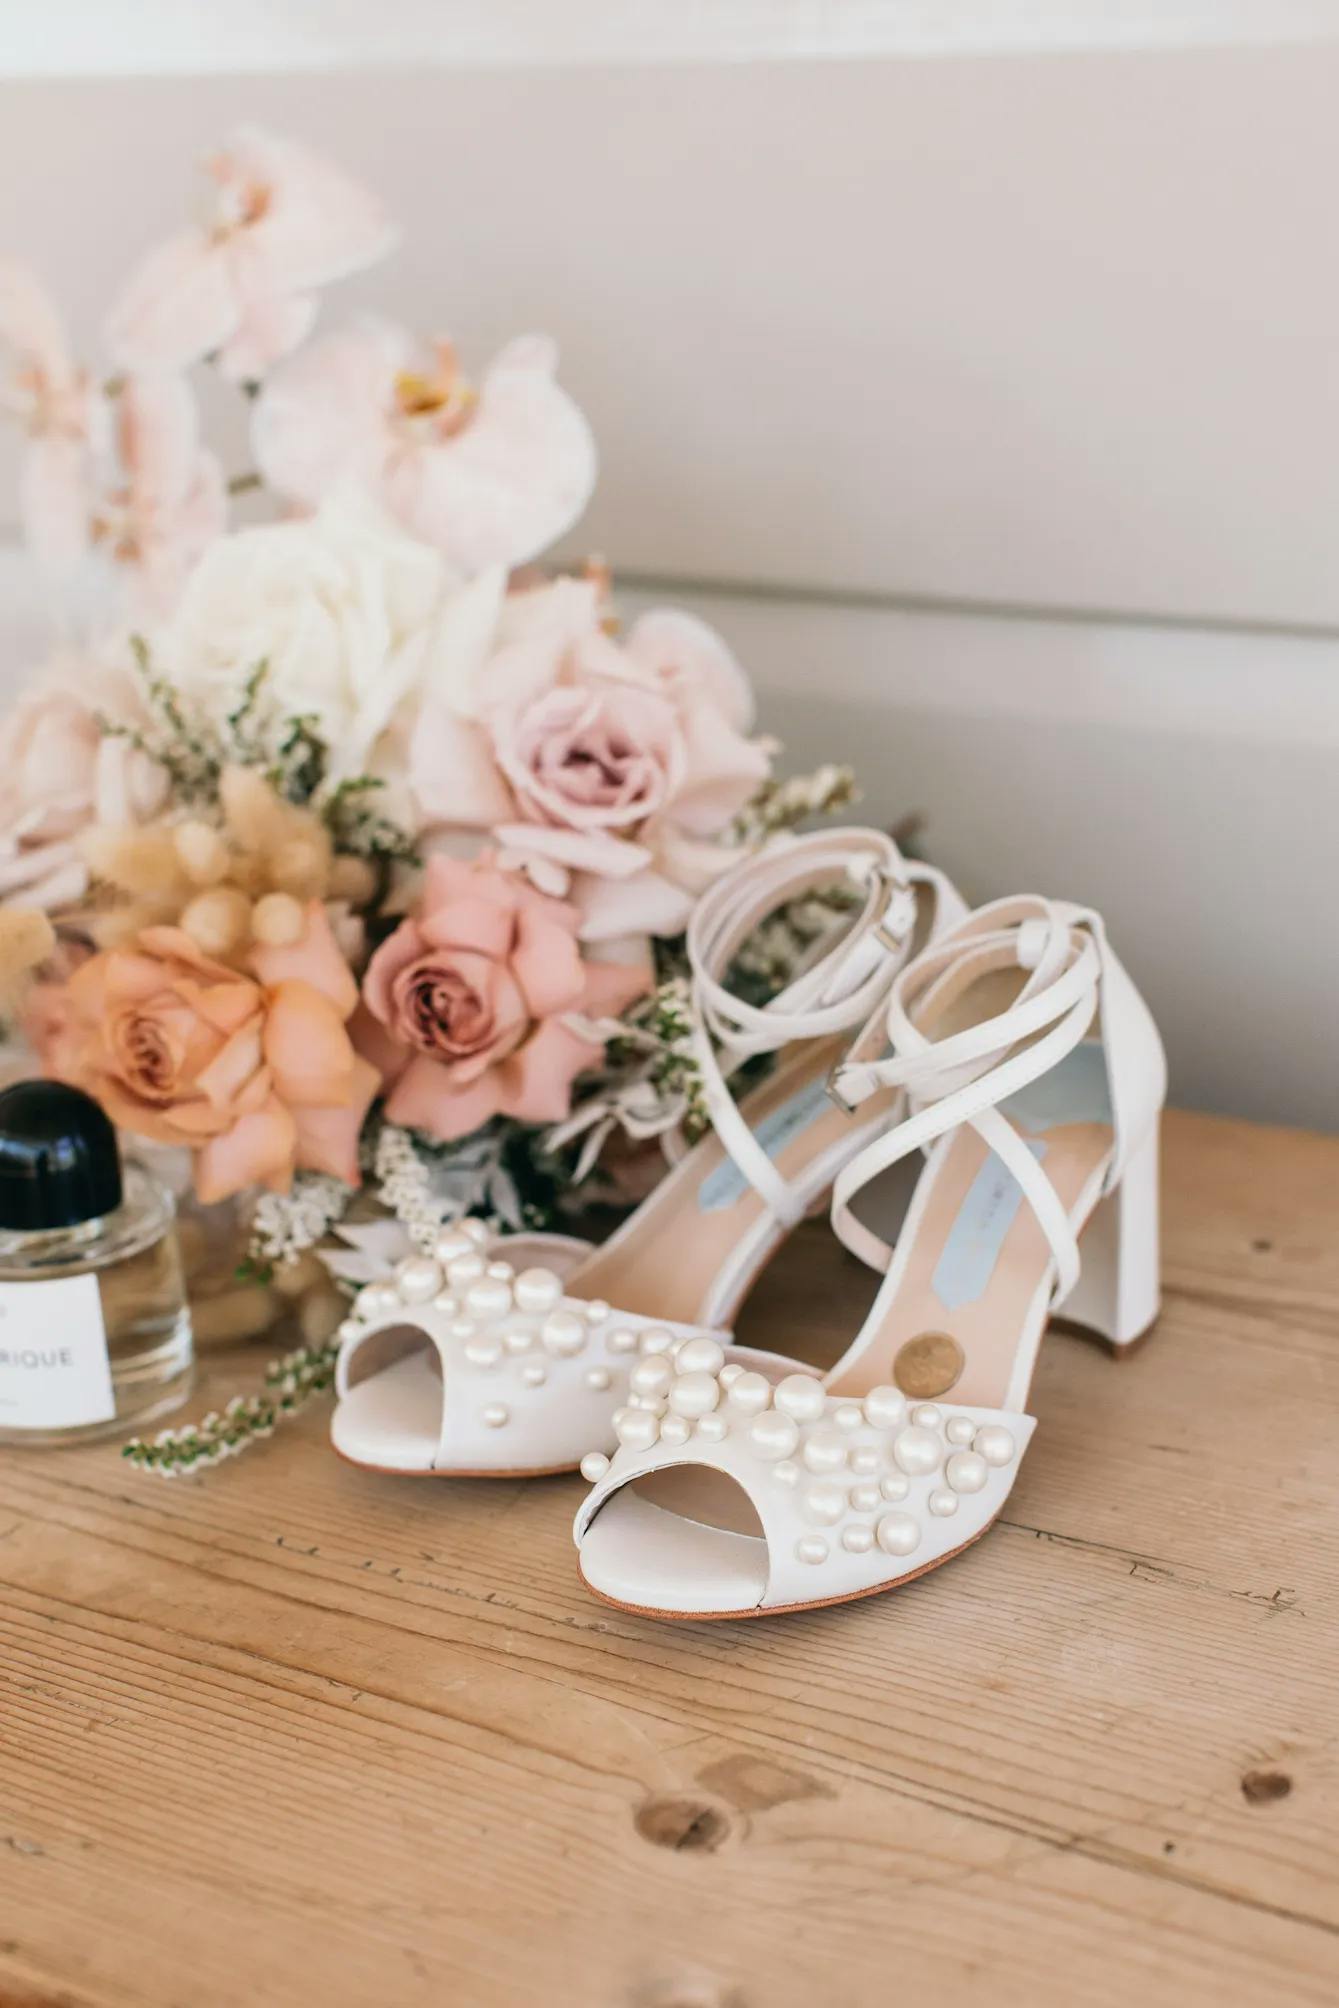 A pair of elegant white high-heeled sandals adorned with pearls is displayed on a wooden surface. Behind the shoes is a stylish floral arrangement with pink and white flowers, alongside a perfume bottle and a necklace, creating a delicate and chic composition.